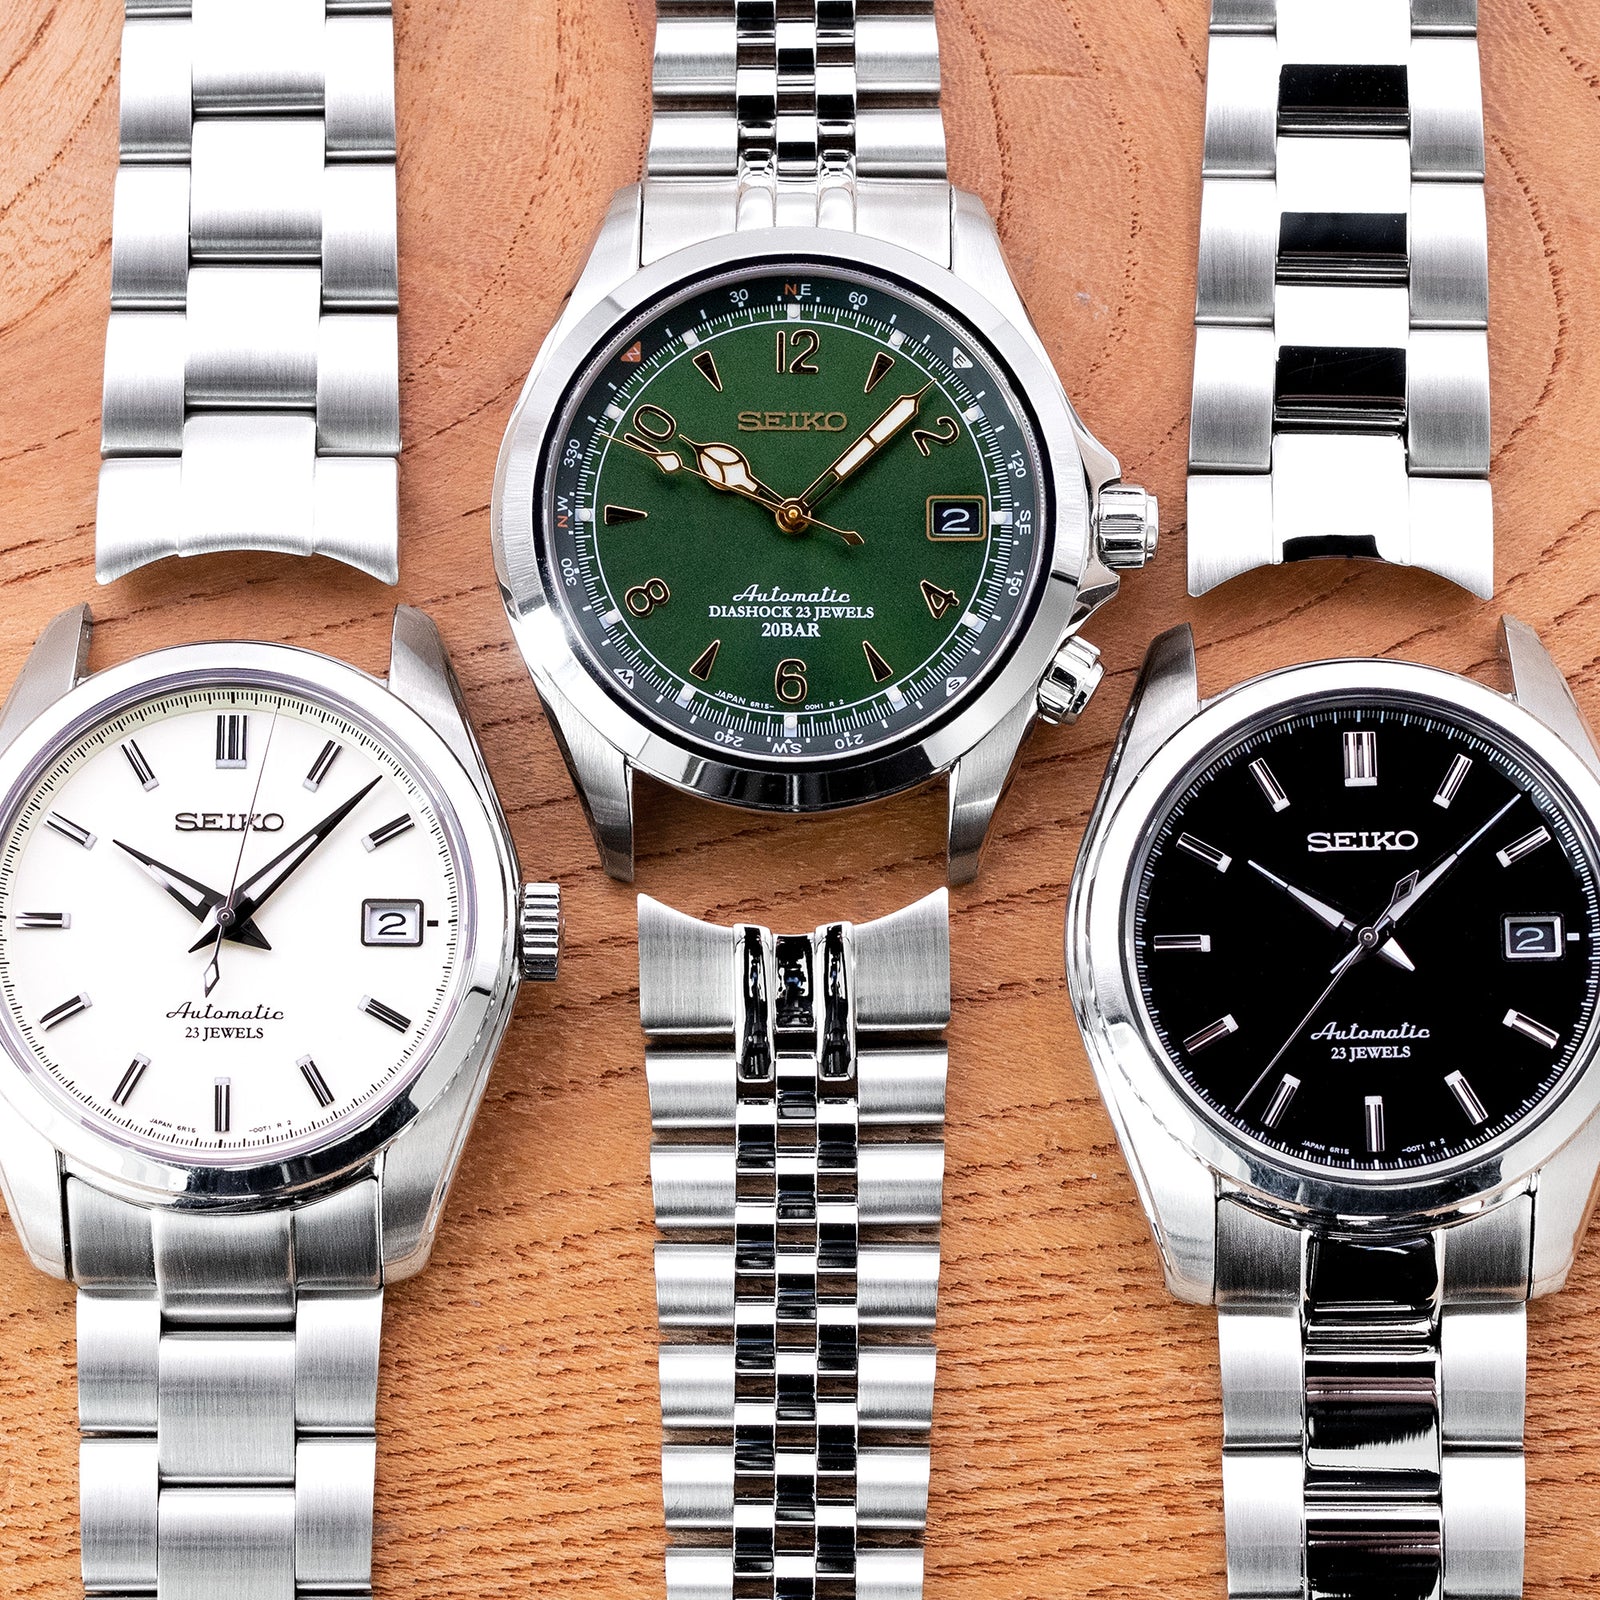 Salute to all of the Seiko SARB Watches | Strapcode watch bands